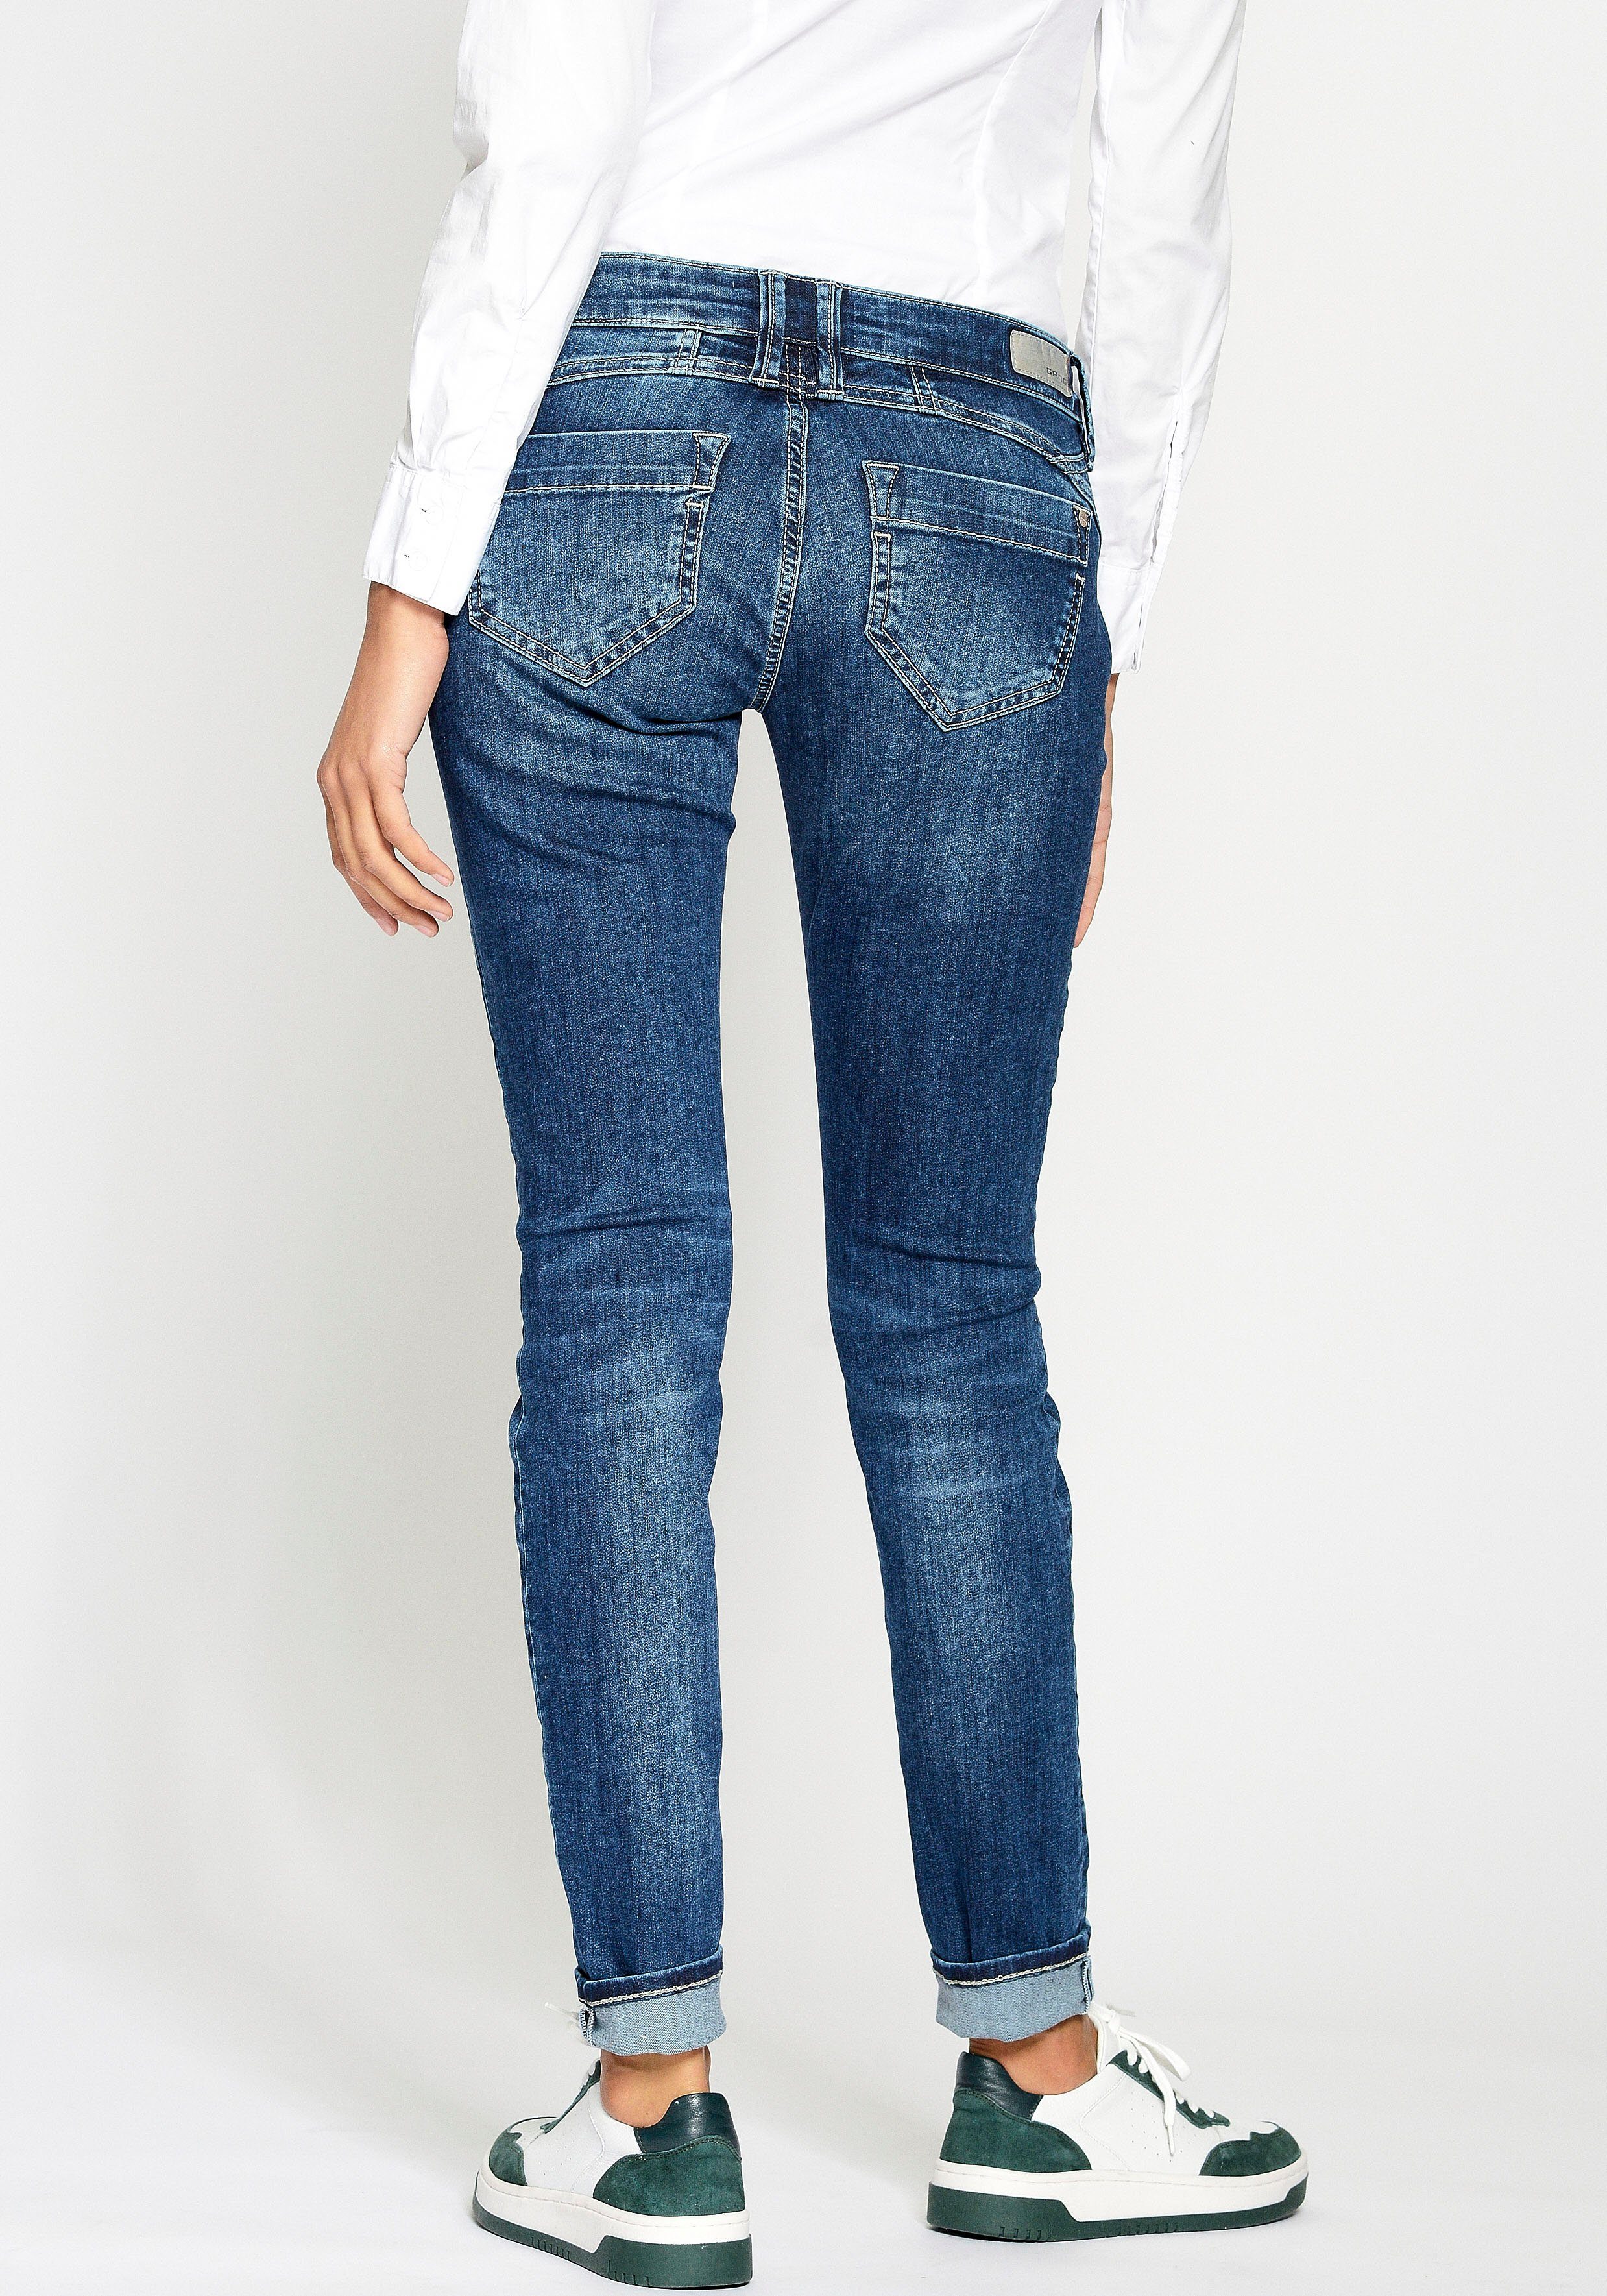 GANG Skinny-fit-Jeans 94Nena in blue authenischer Used-Waschung mid